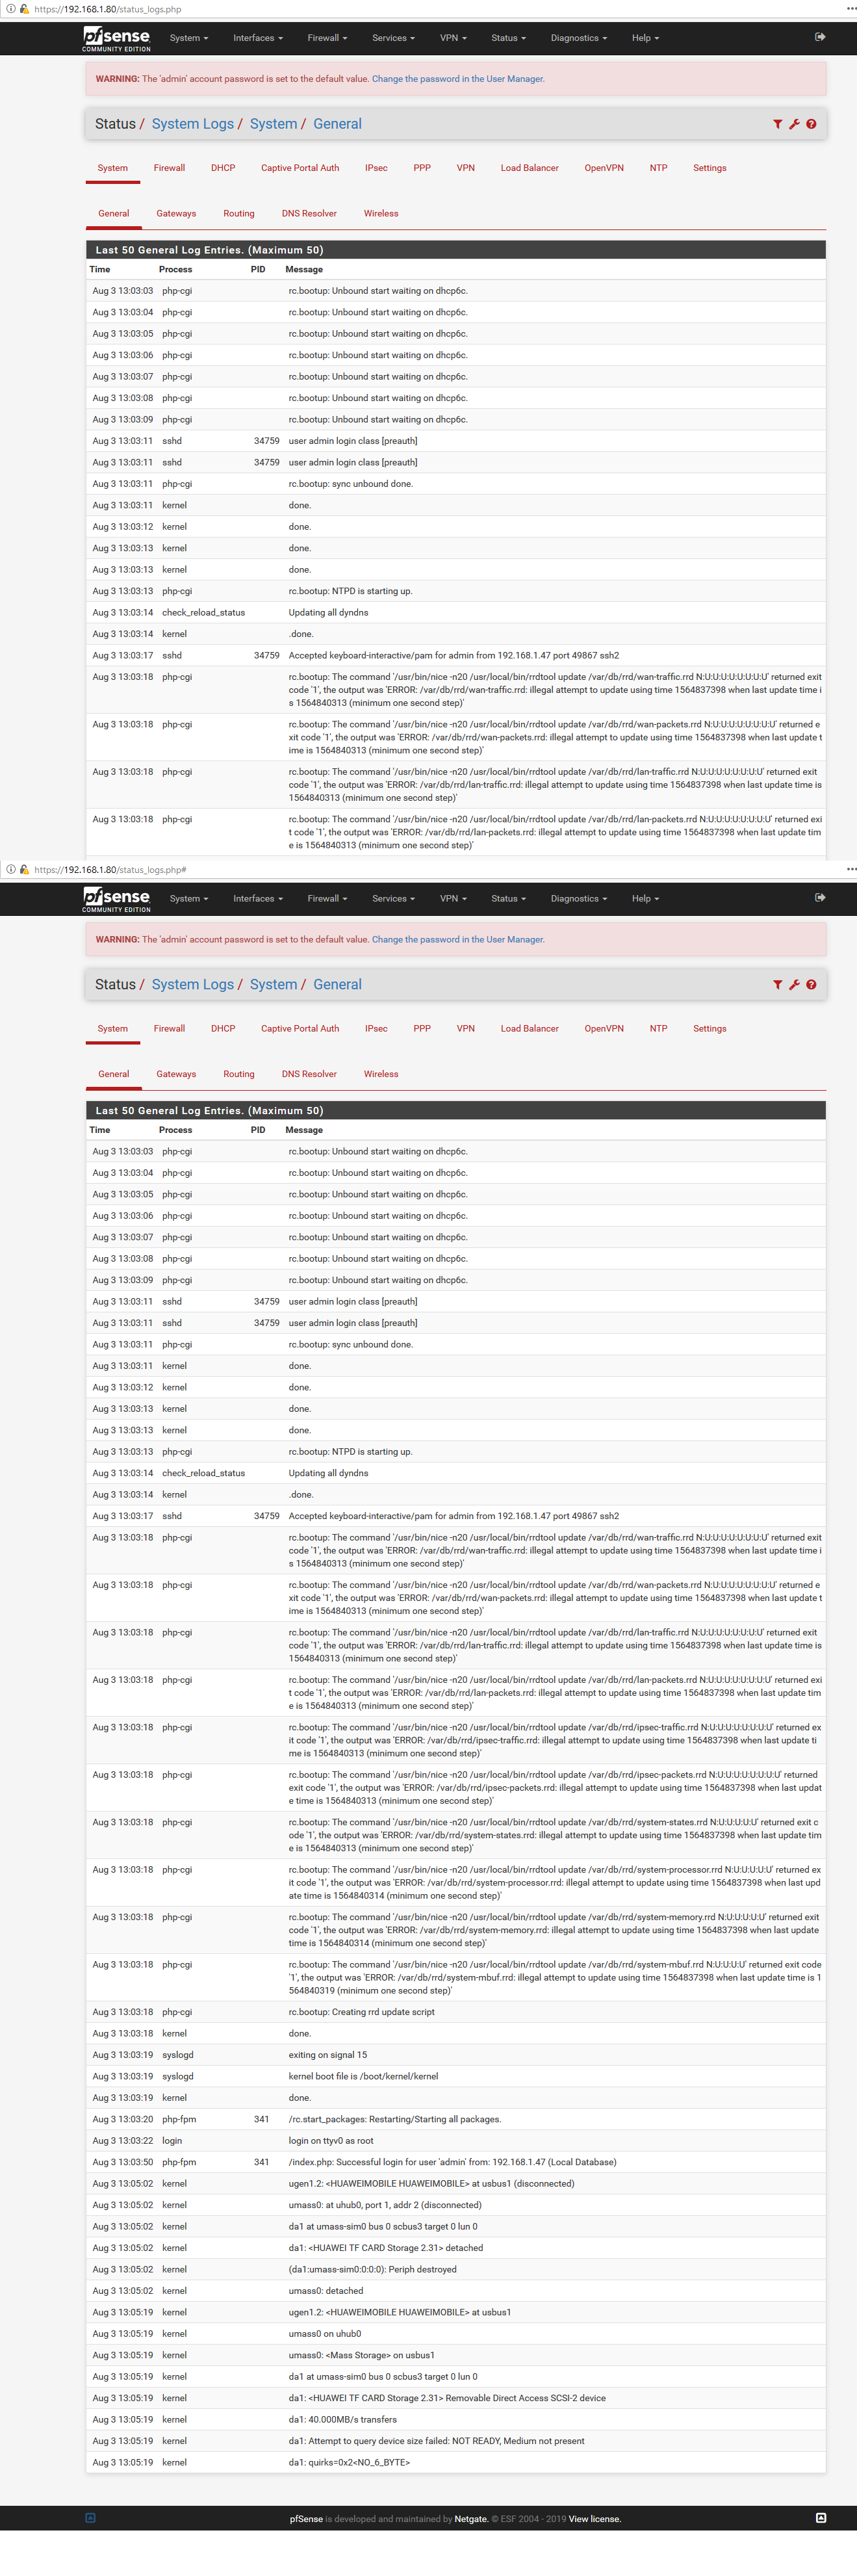 2019-08-03_18-38-53 syslog.png